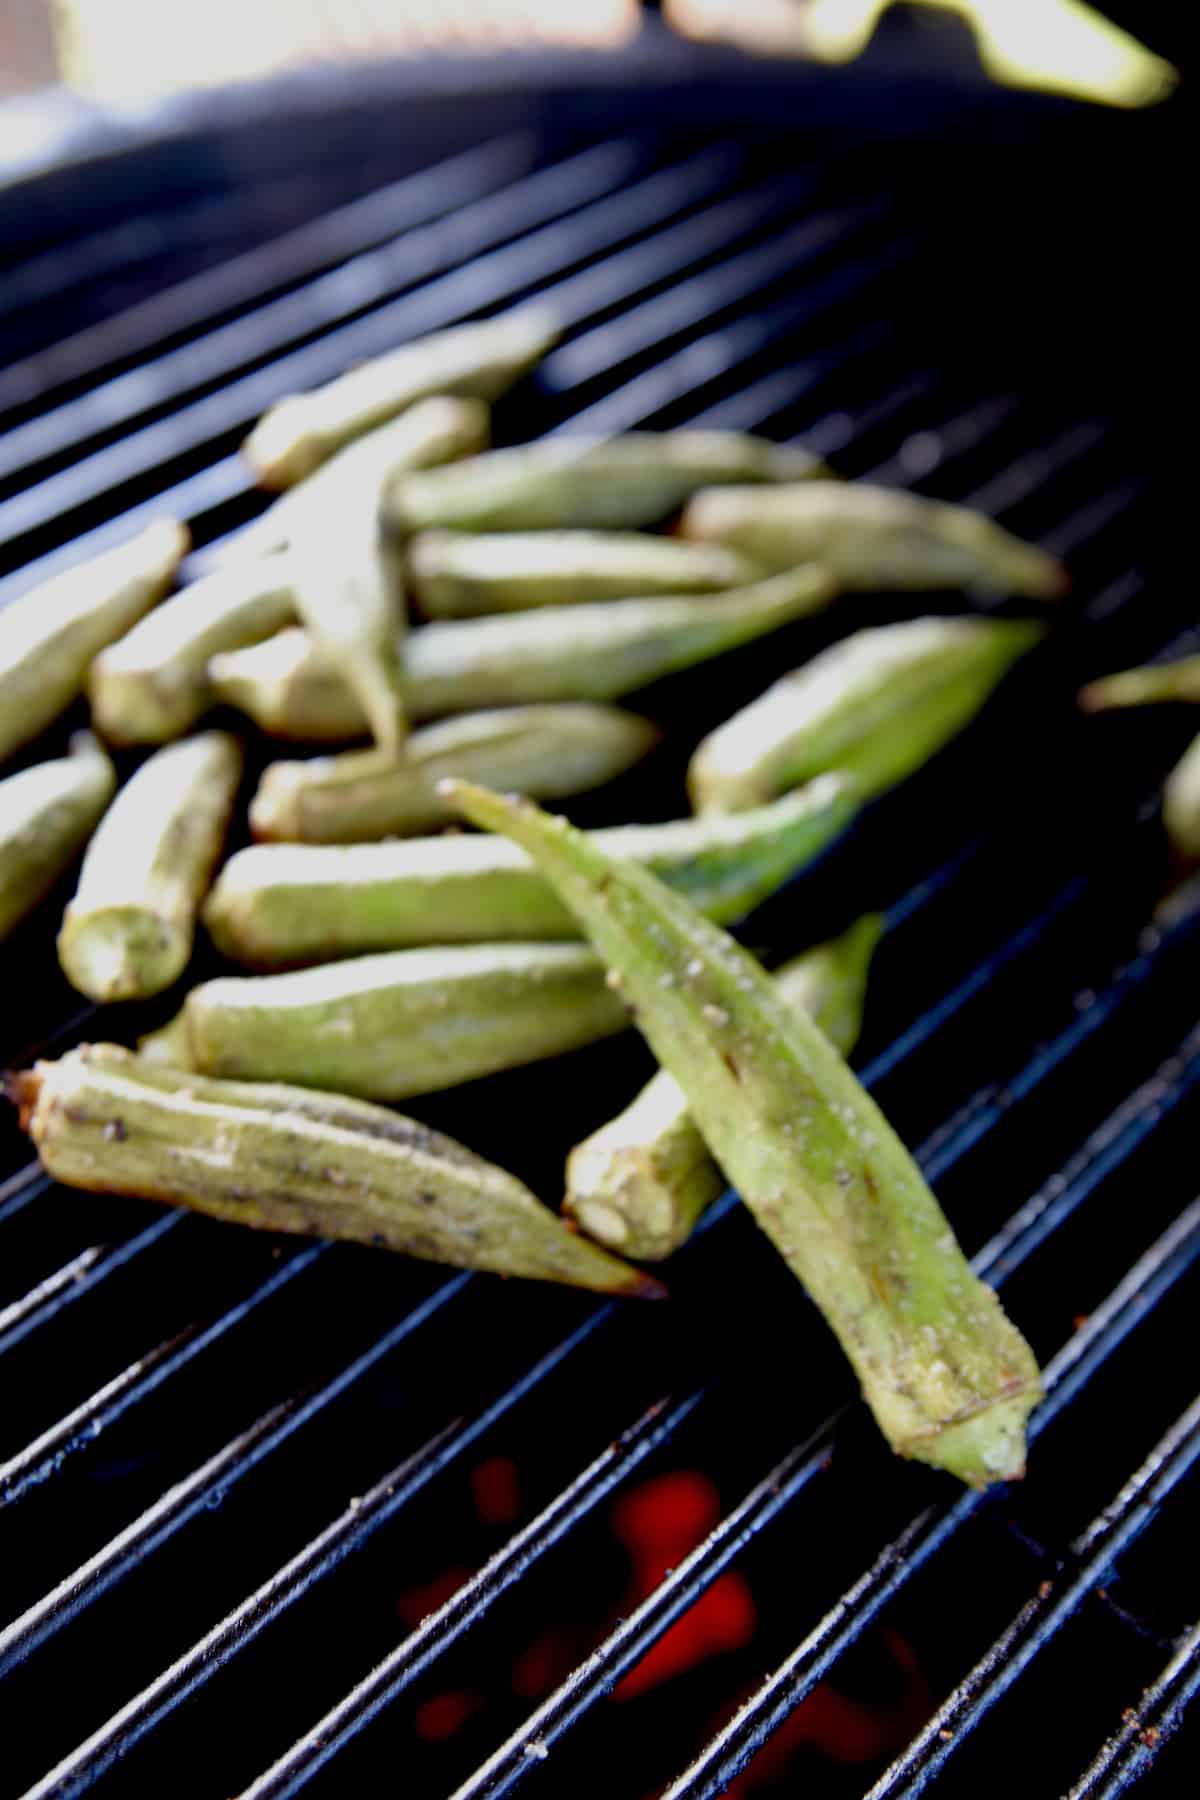 Okra on the grill.